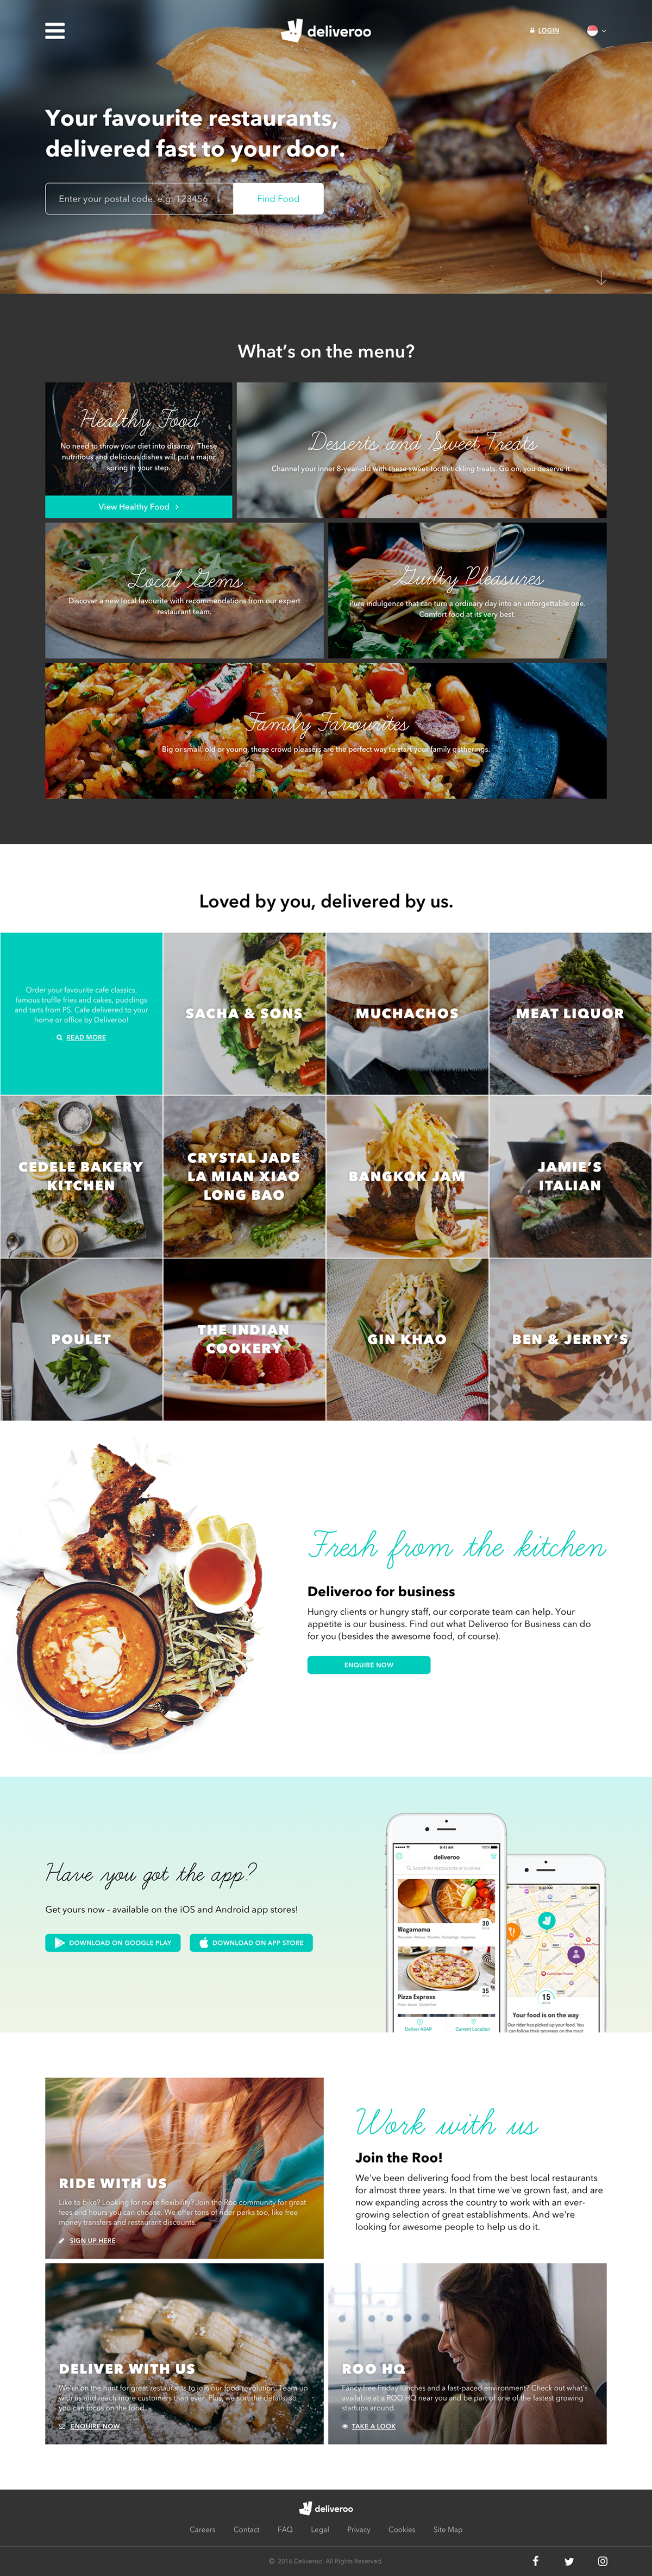 Deliveroo singapore redesign Website user experience Food  delivery restaurant hiring Careers